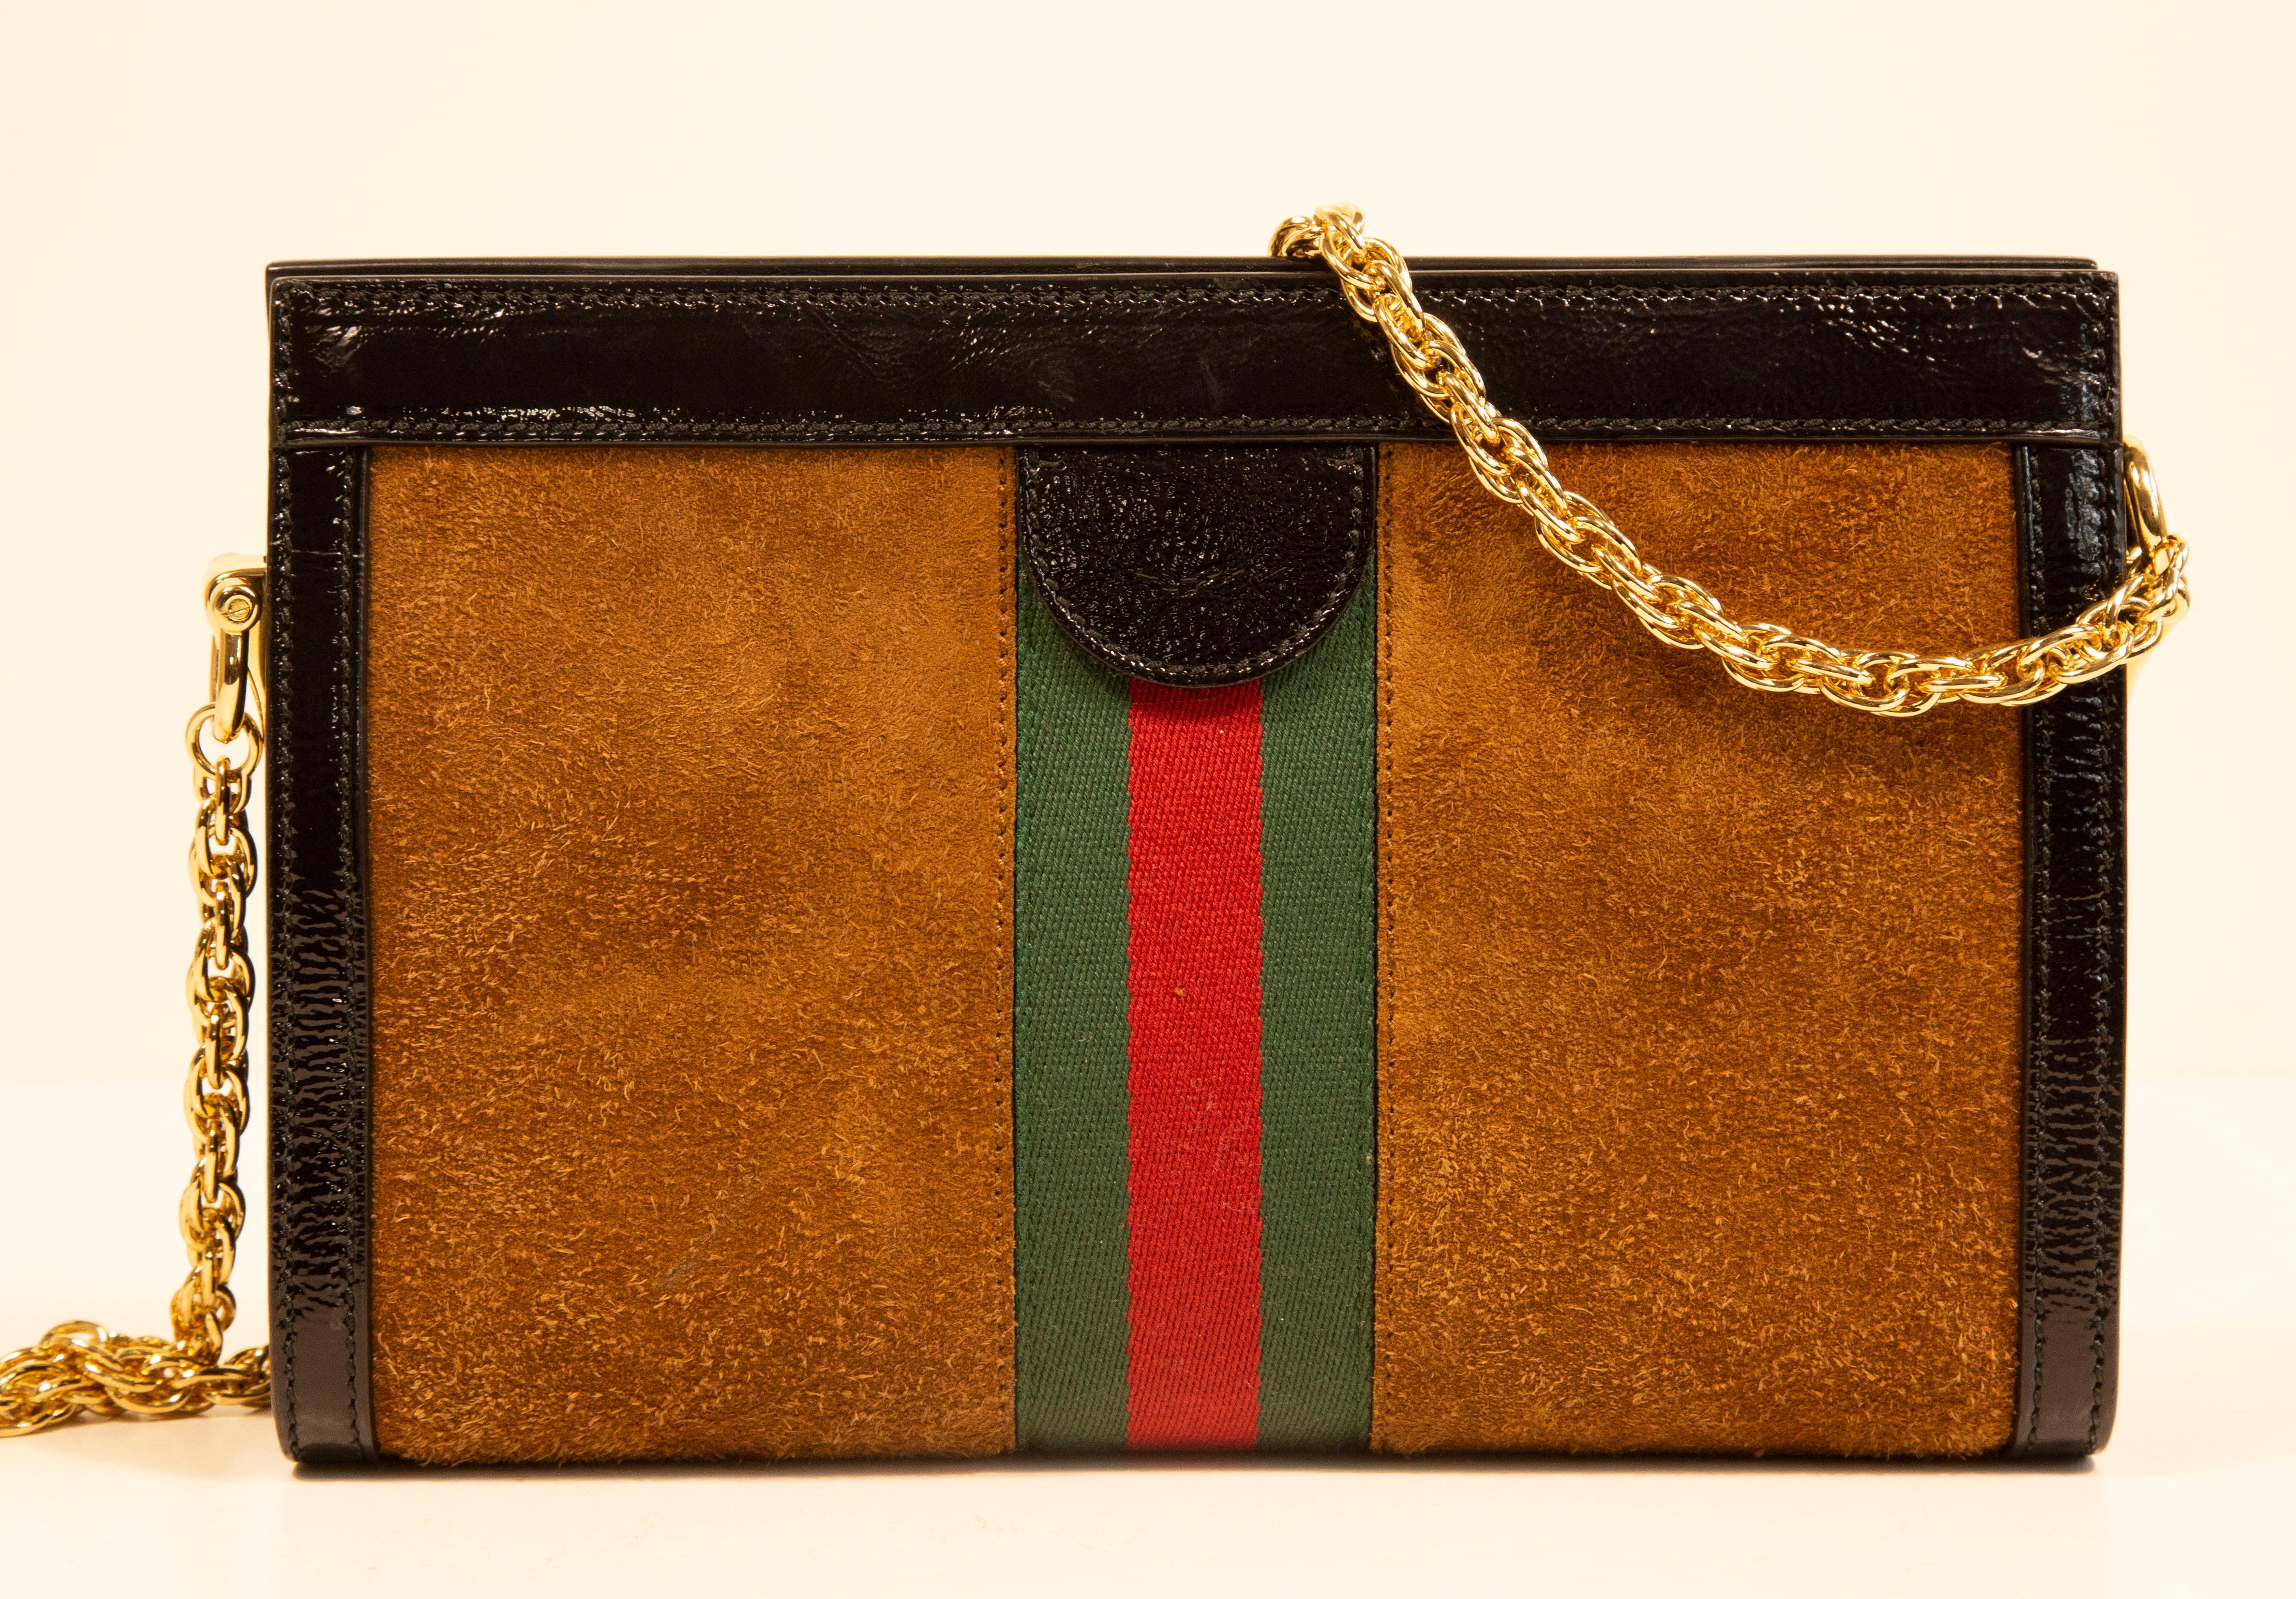 Gucci Ophidia Chain Shoulder Bag in Brown Suede  In Excellent Condition For Sale In Arnhem, NL